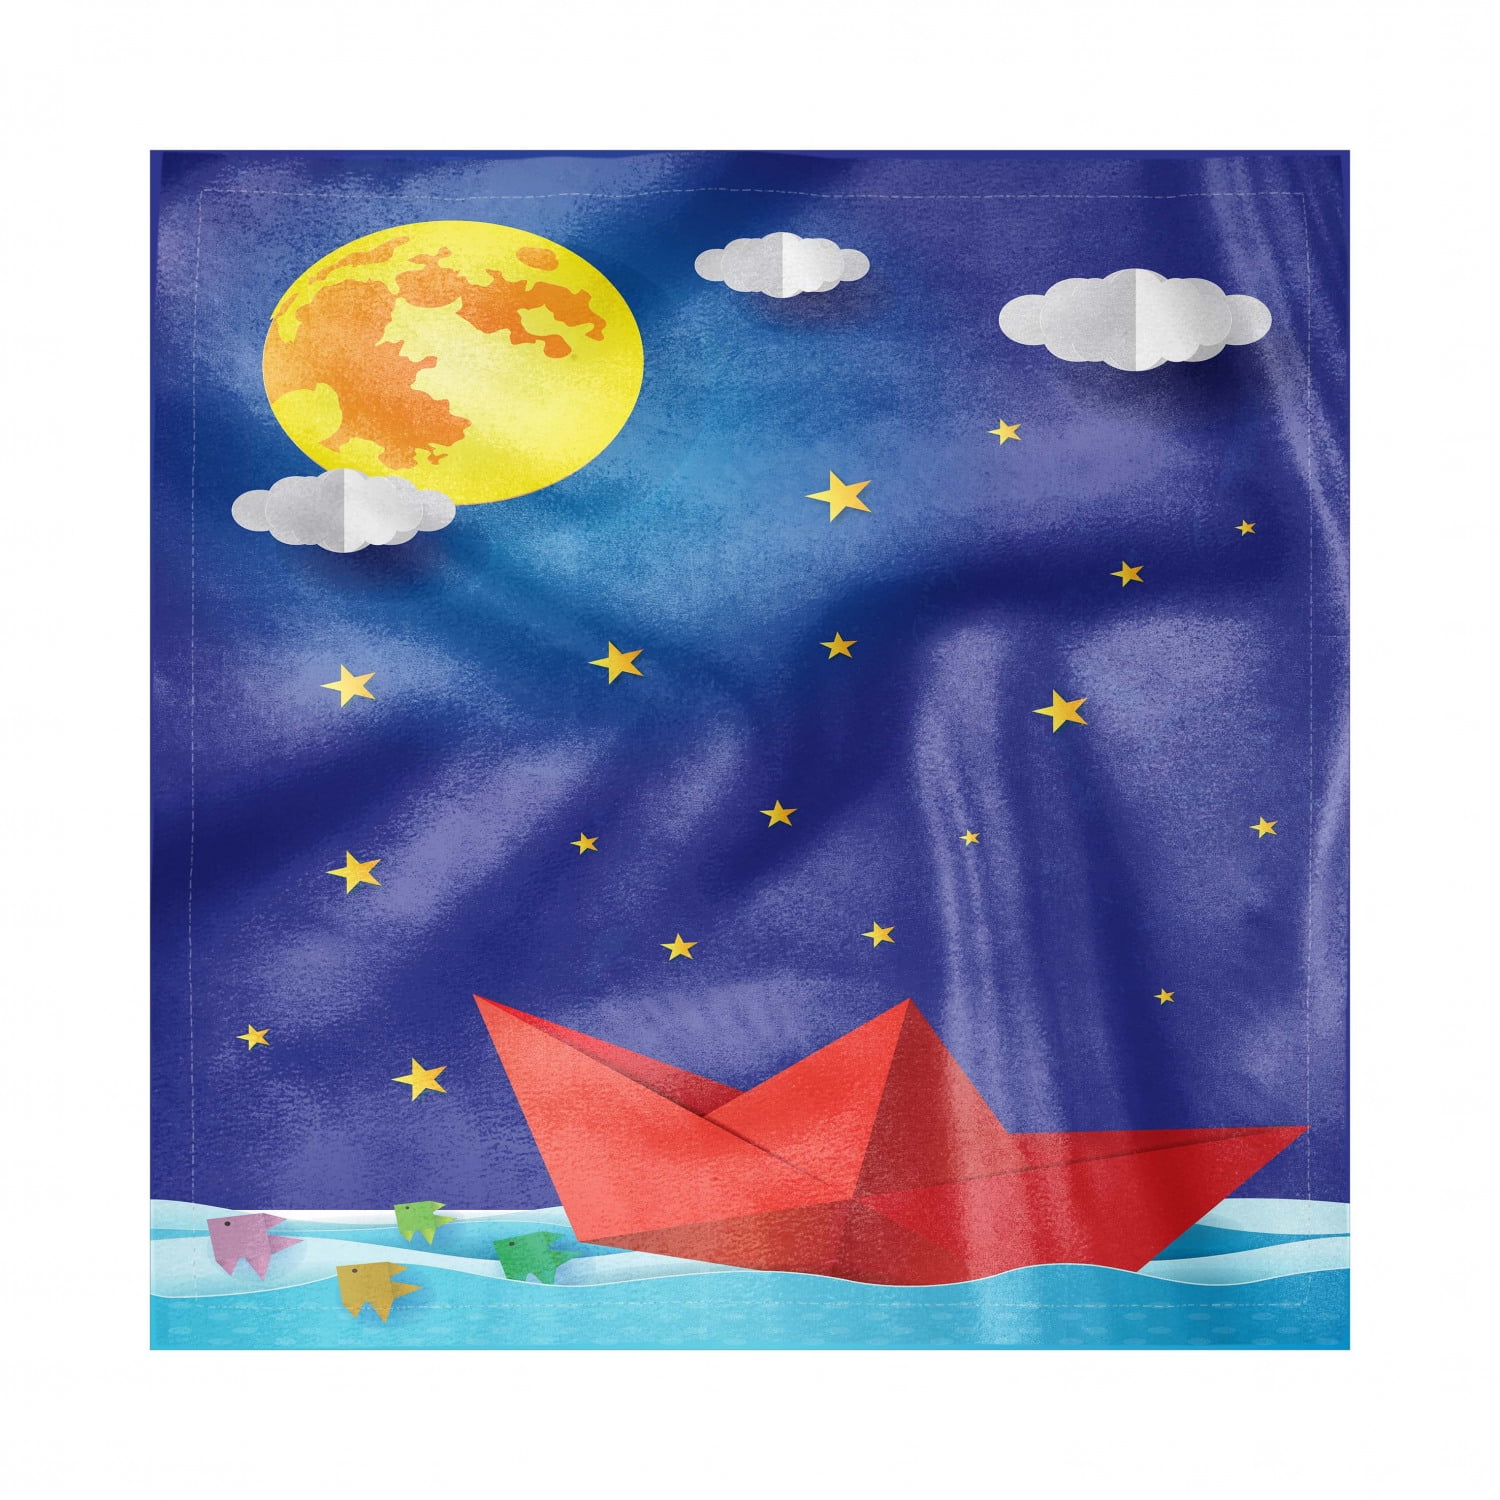 Full Moon Napkins Set of 4, Origami Style Boat Floating on Water with Fish Surreal Design, Silky